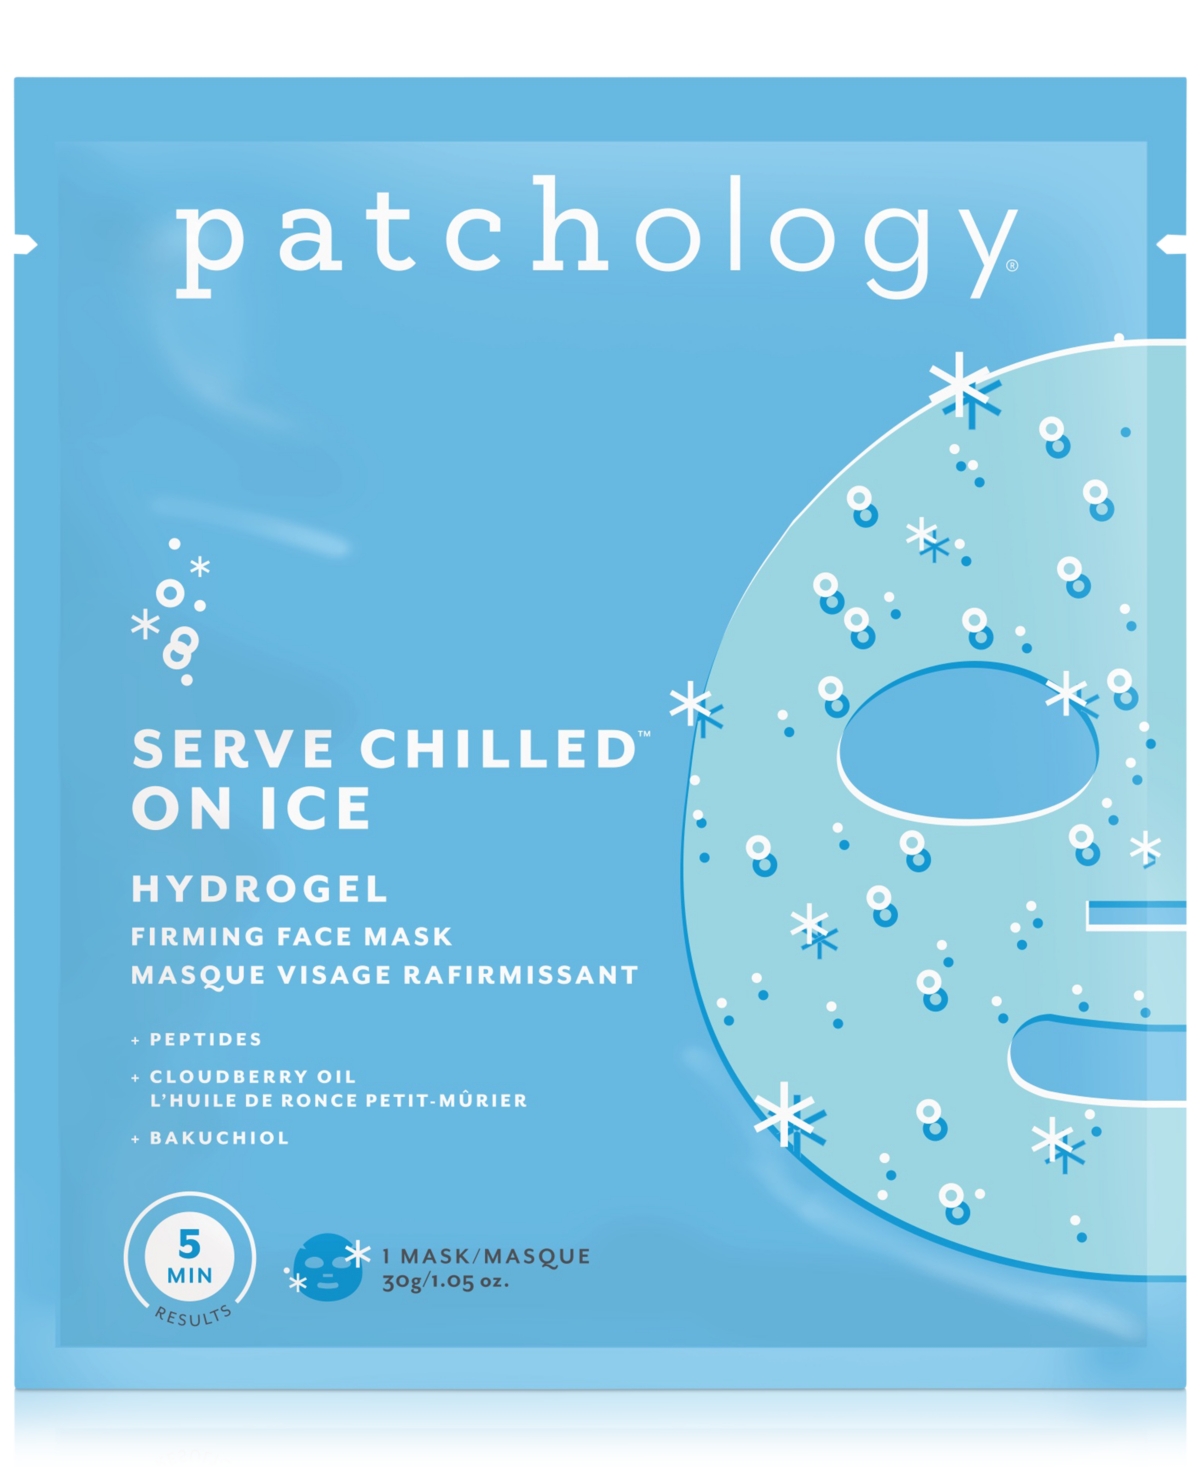 PATCHOLOGY SERVE CHILLED ON ICE FIRMING FACE MASK